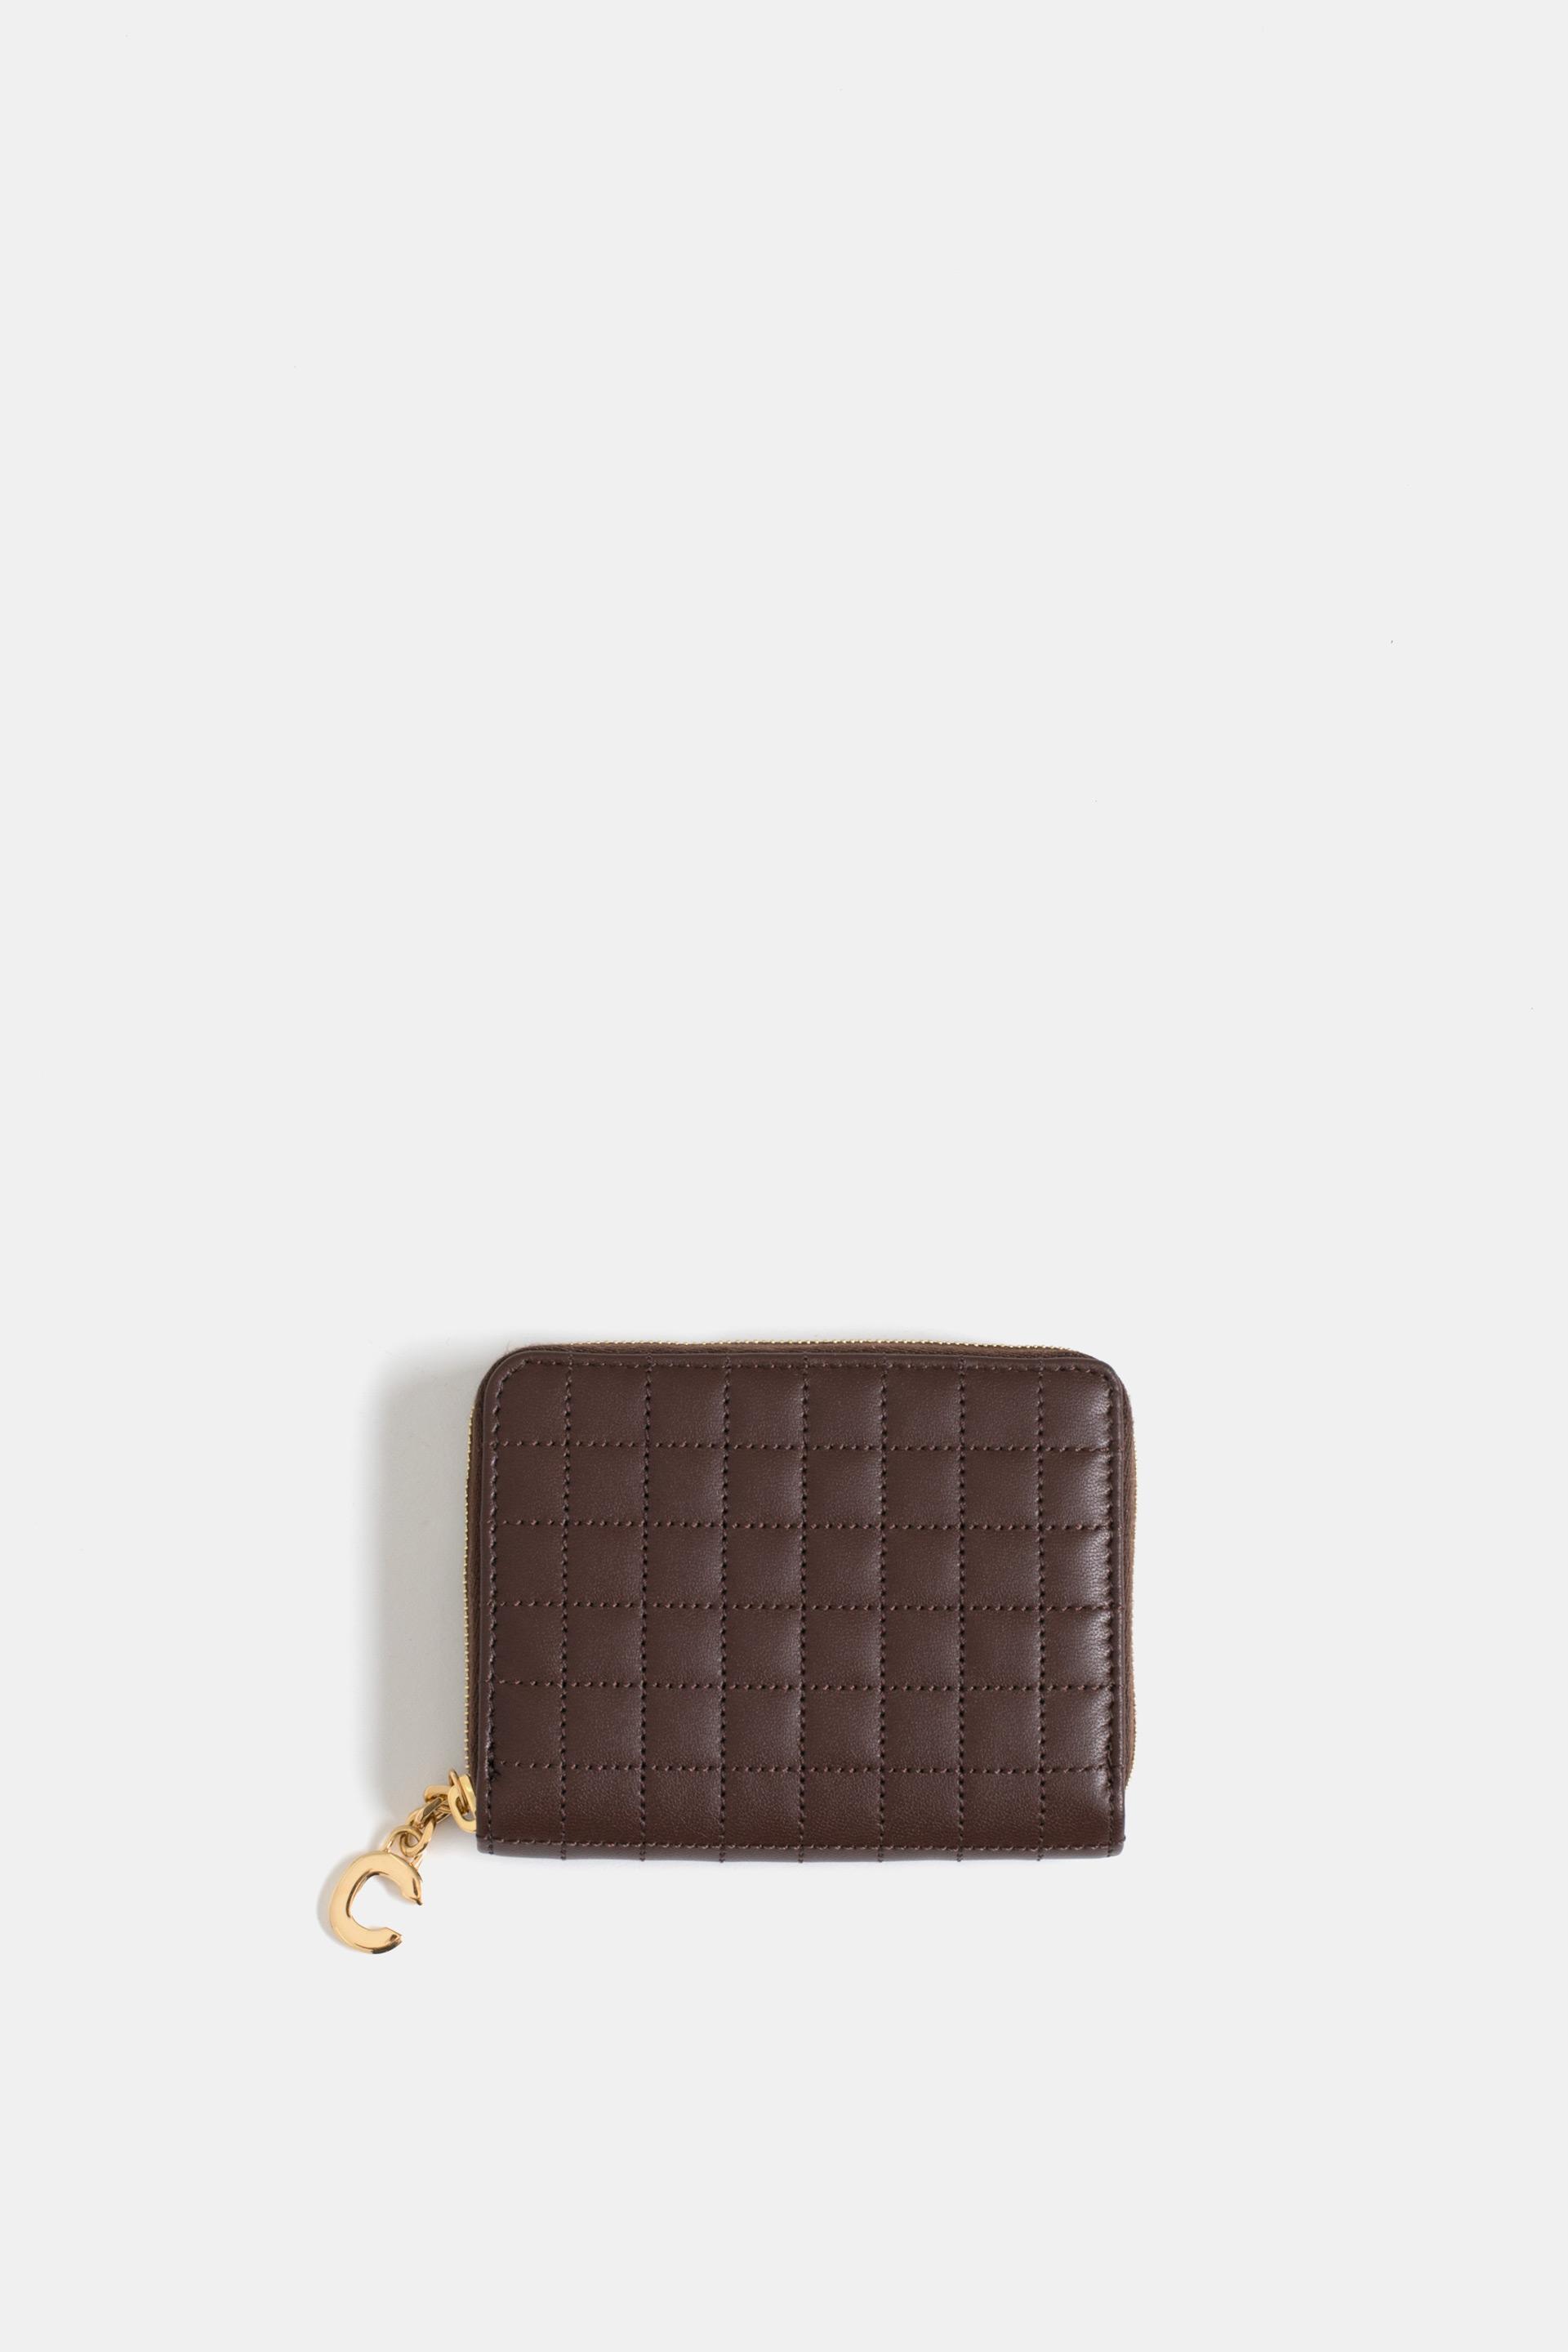 Celine Leather C Charm Compact Zipped Quilted Wallet in Brown 